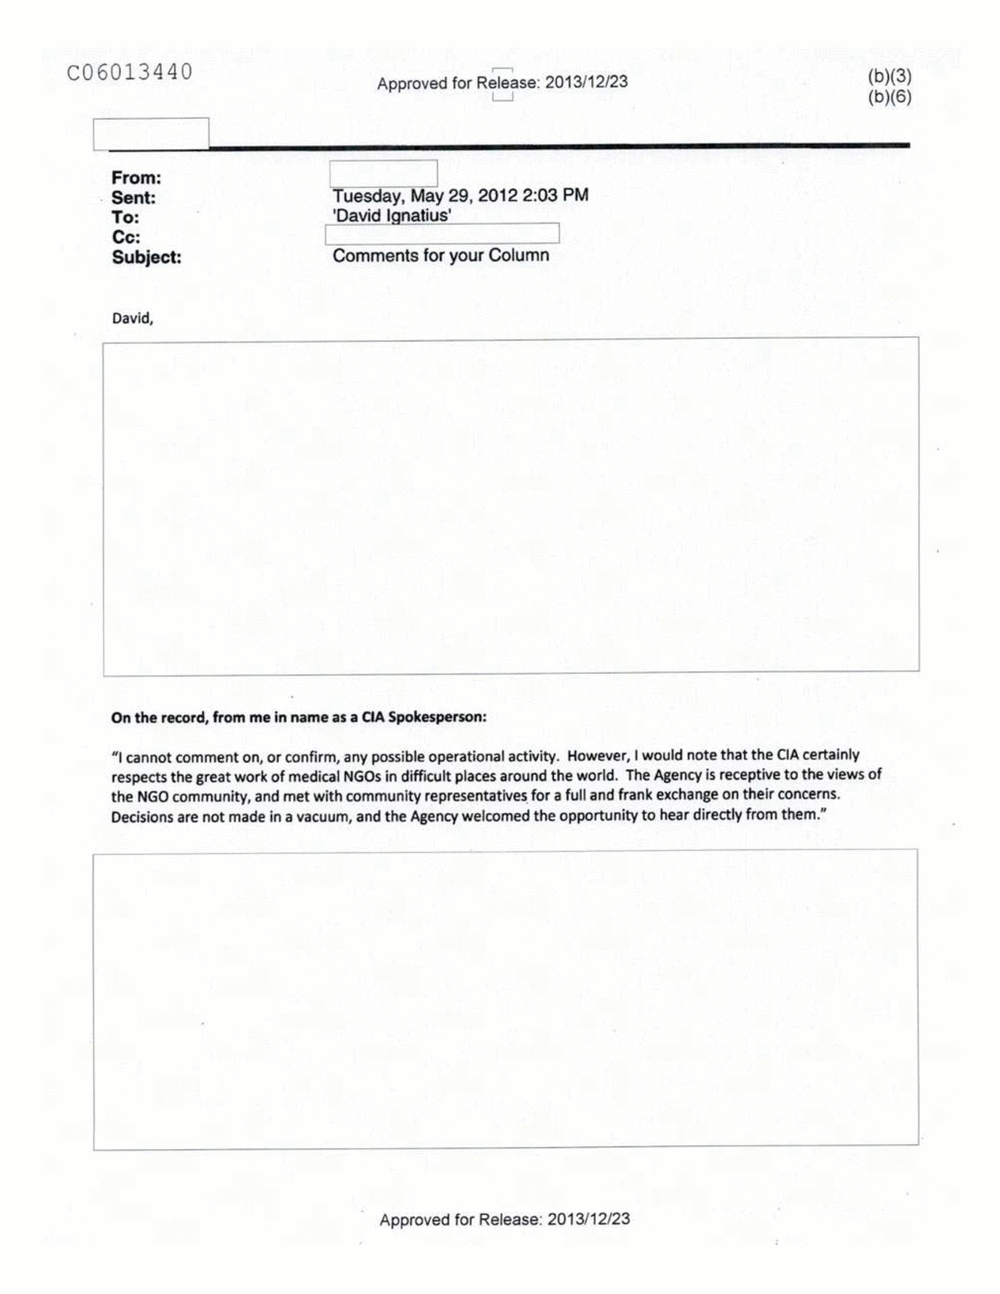 Page 304 from Email Correspondence Between Reporters and CIA Flacks